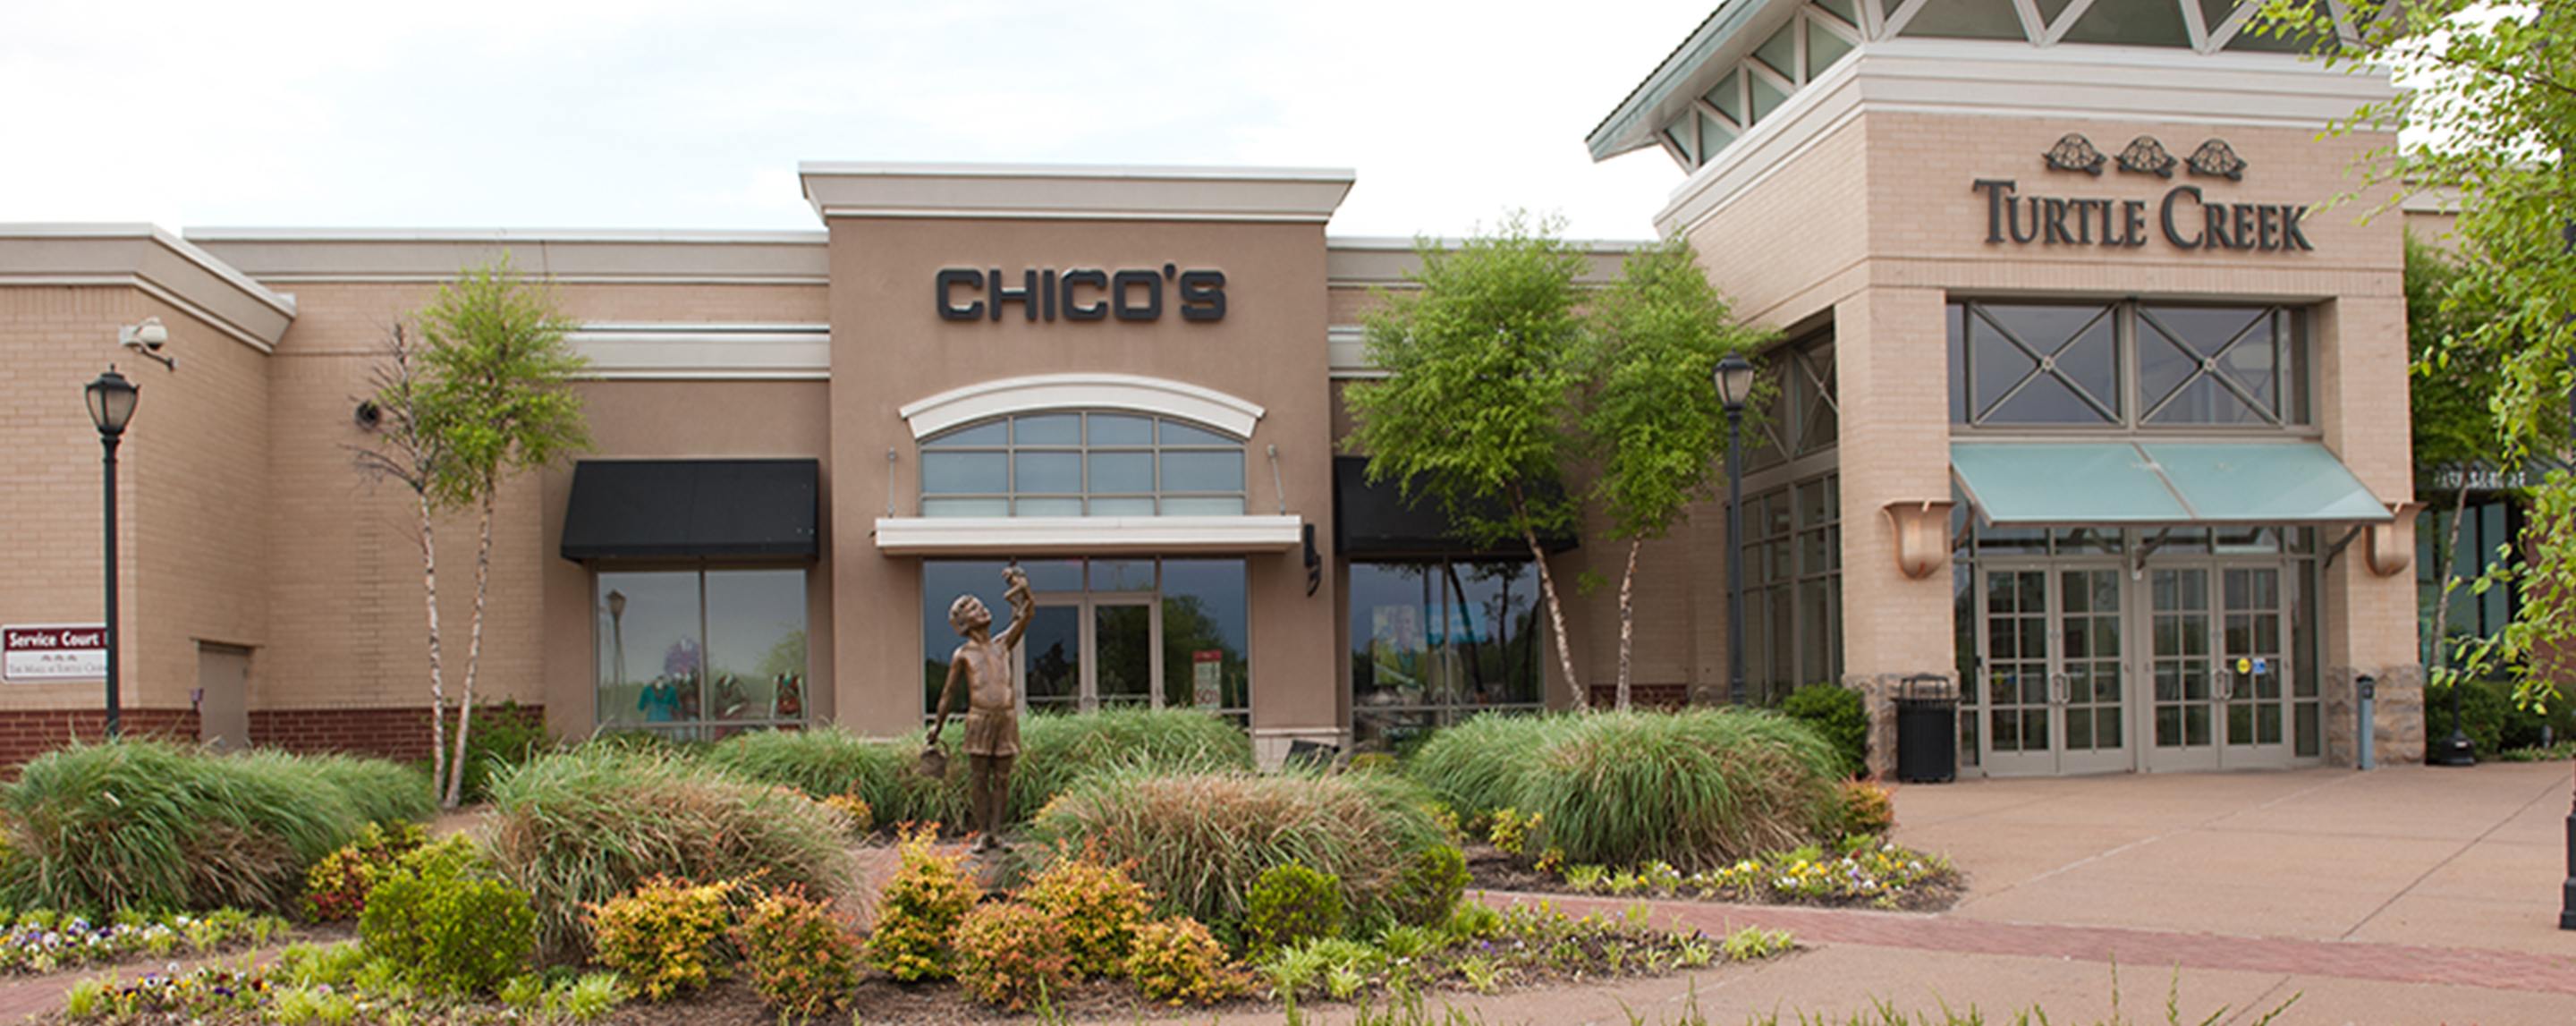 The exterior of a mall. There are bushes in the landscaping in front, and a sign for Chico's is visi